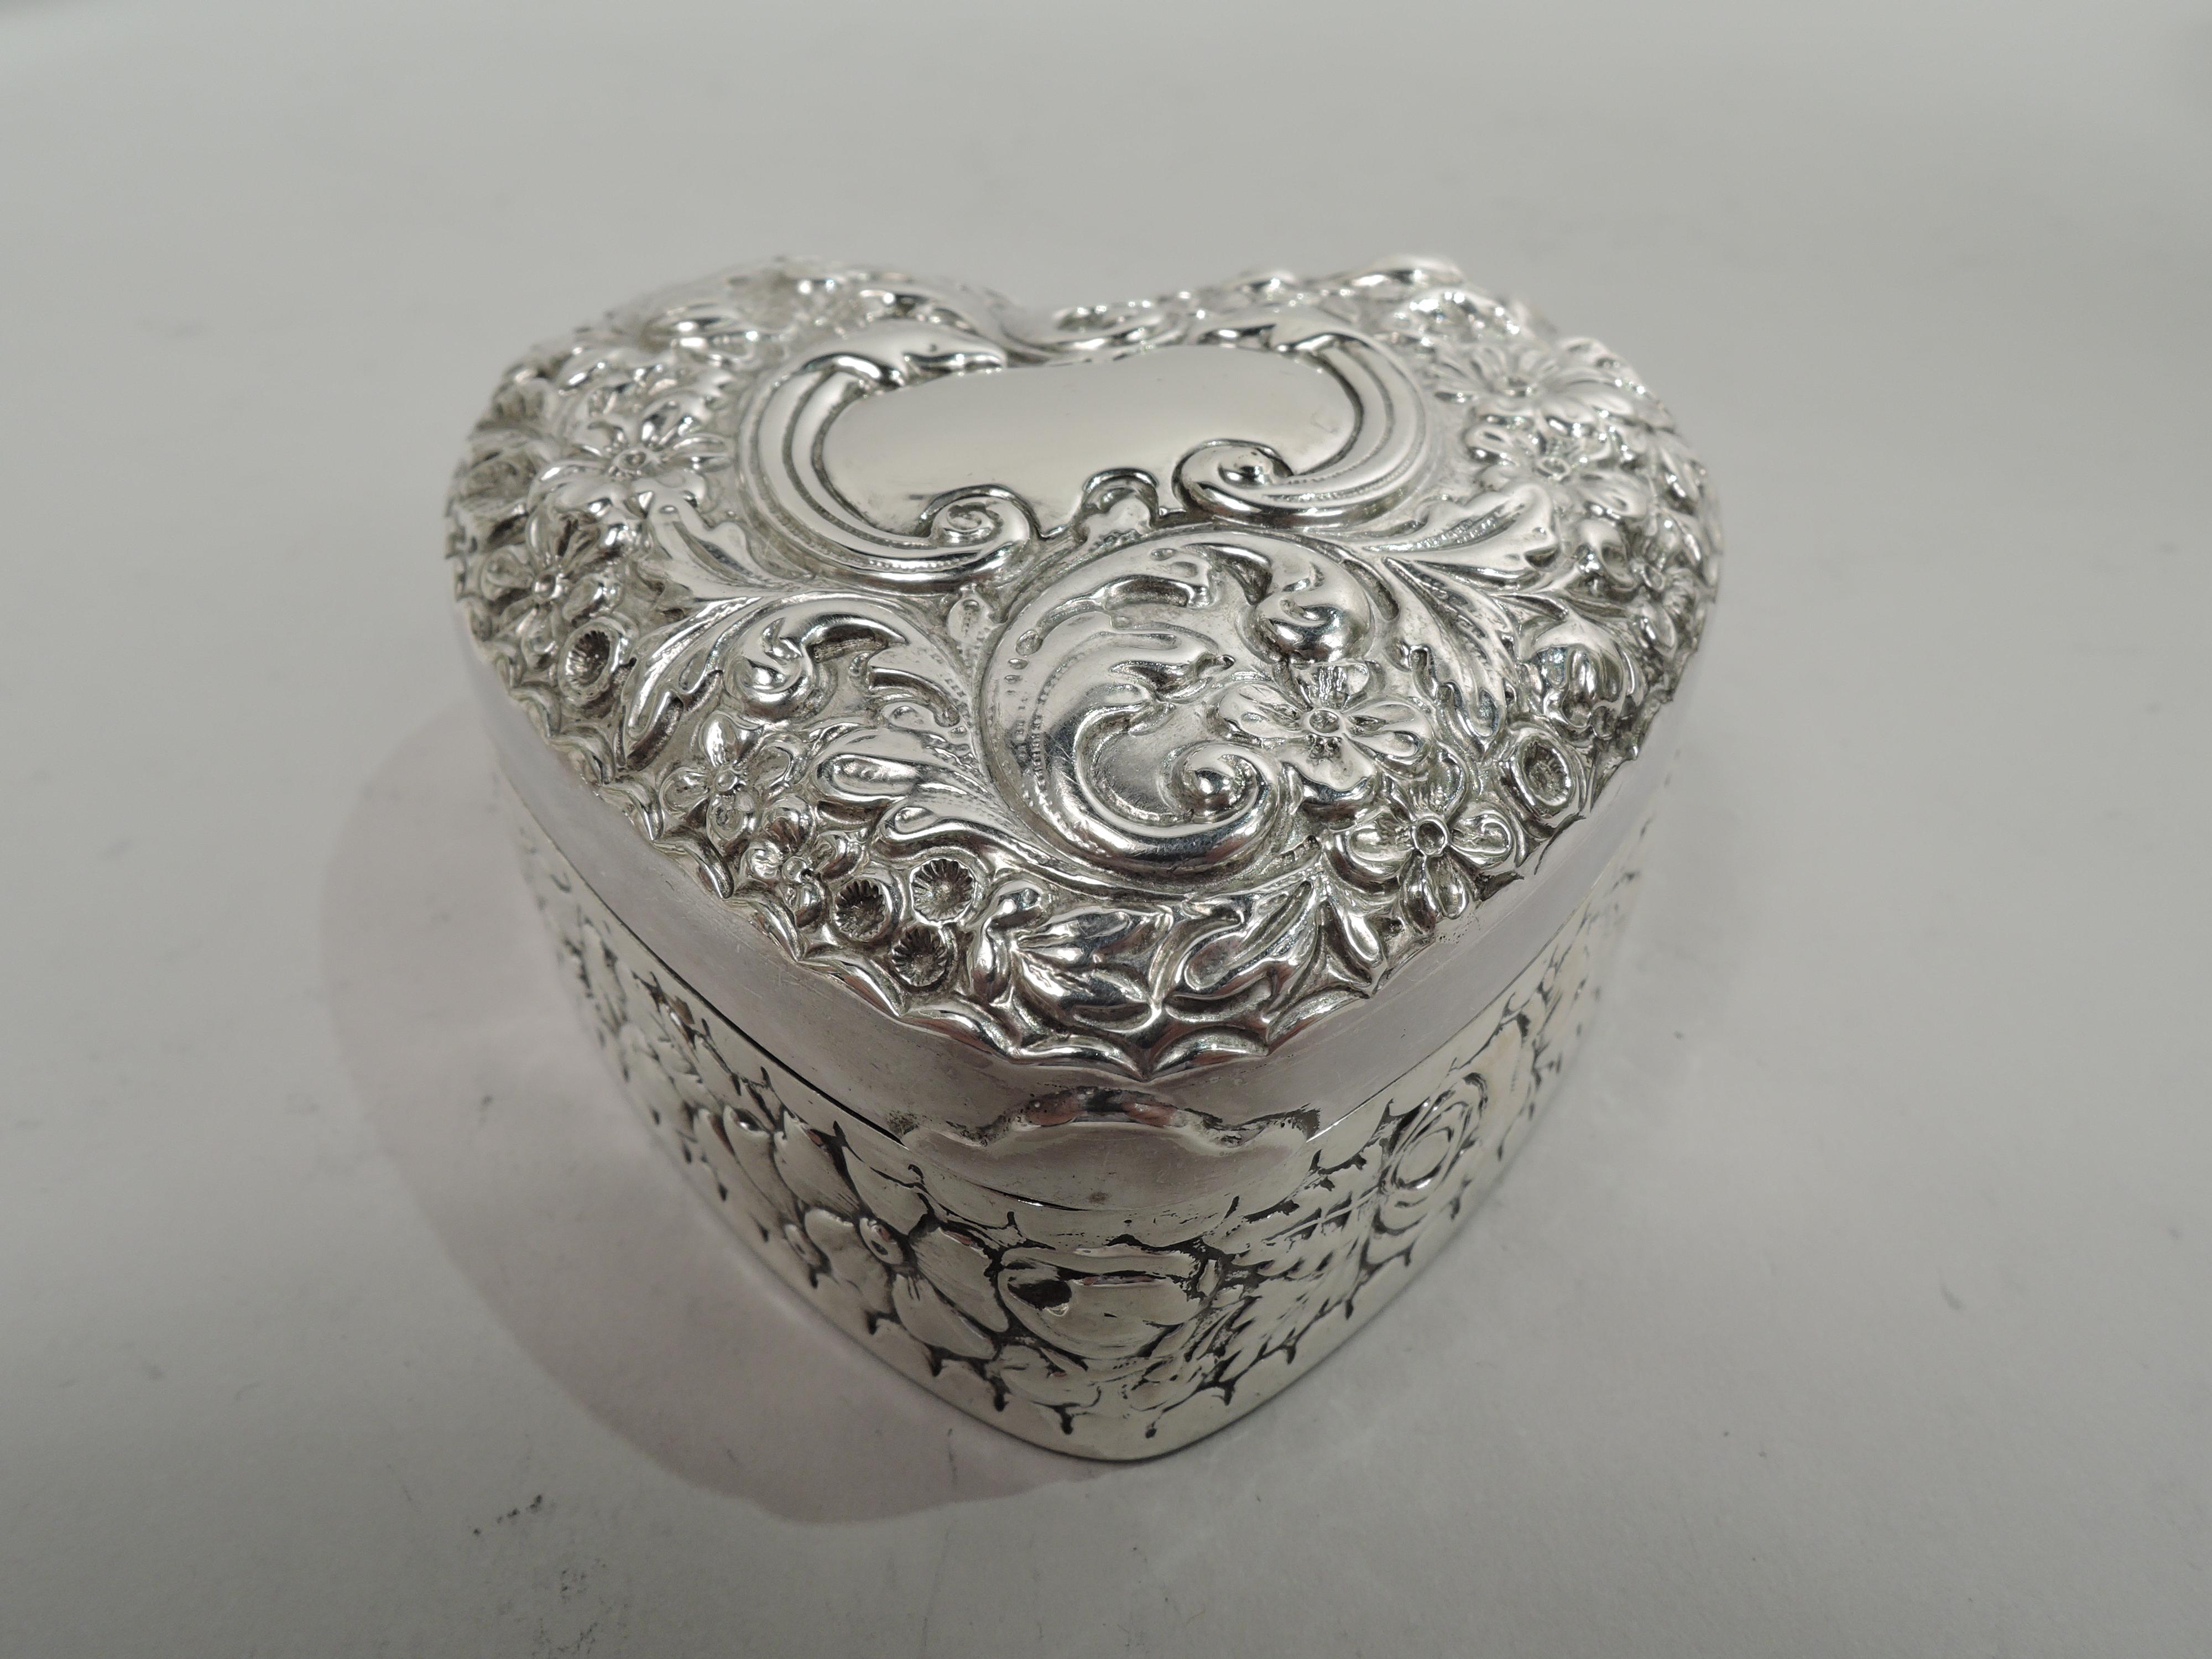 Victorian sterling silver jewelry box. Made by Gorham in Providence, ca 1890. Heart-shaped with dense repousse flowers and scrolls between scalloped borders on sides and cover top. Cover top has scrolled cartouche (vacant). Velvet lined. Fully